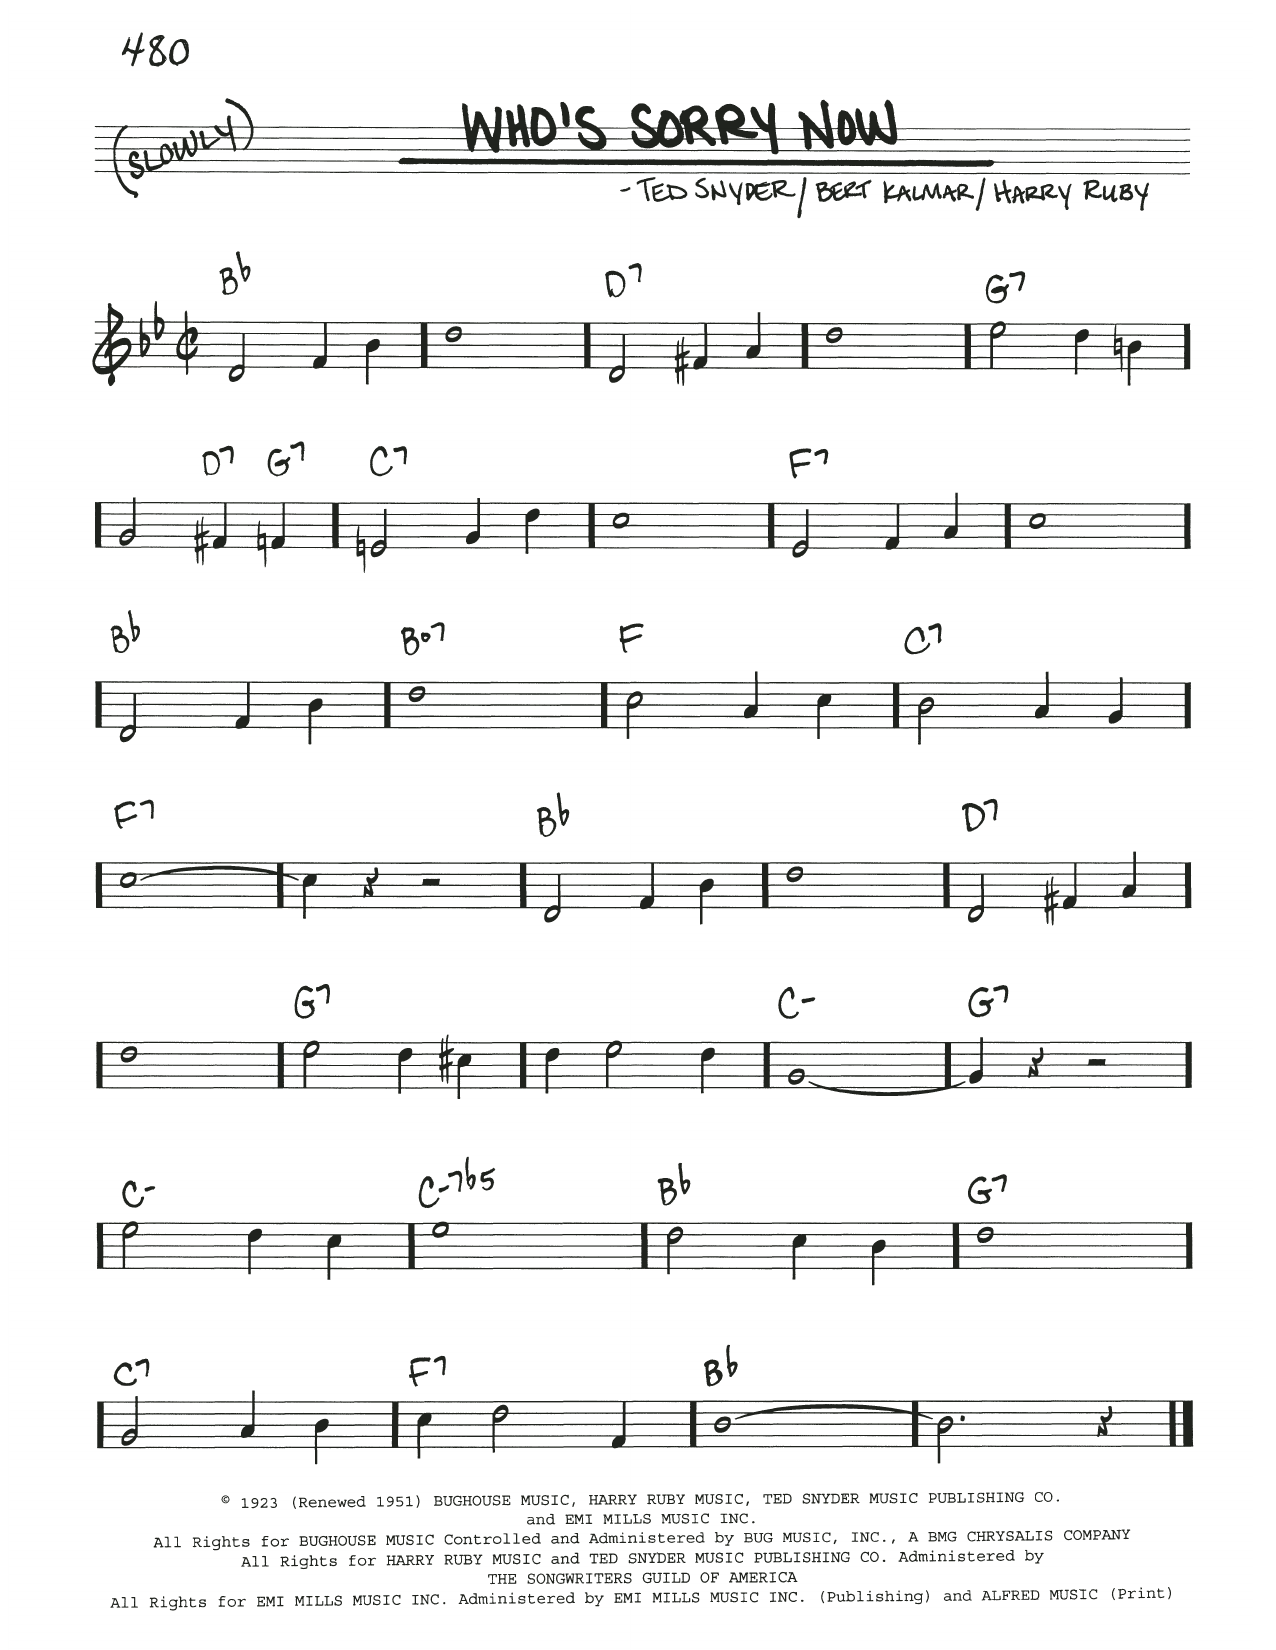 Download Connie Francis Who's Sorry Now Sheet Music